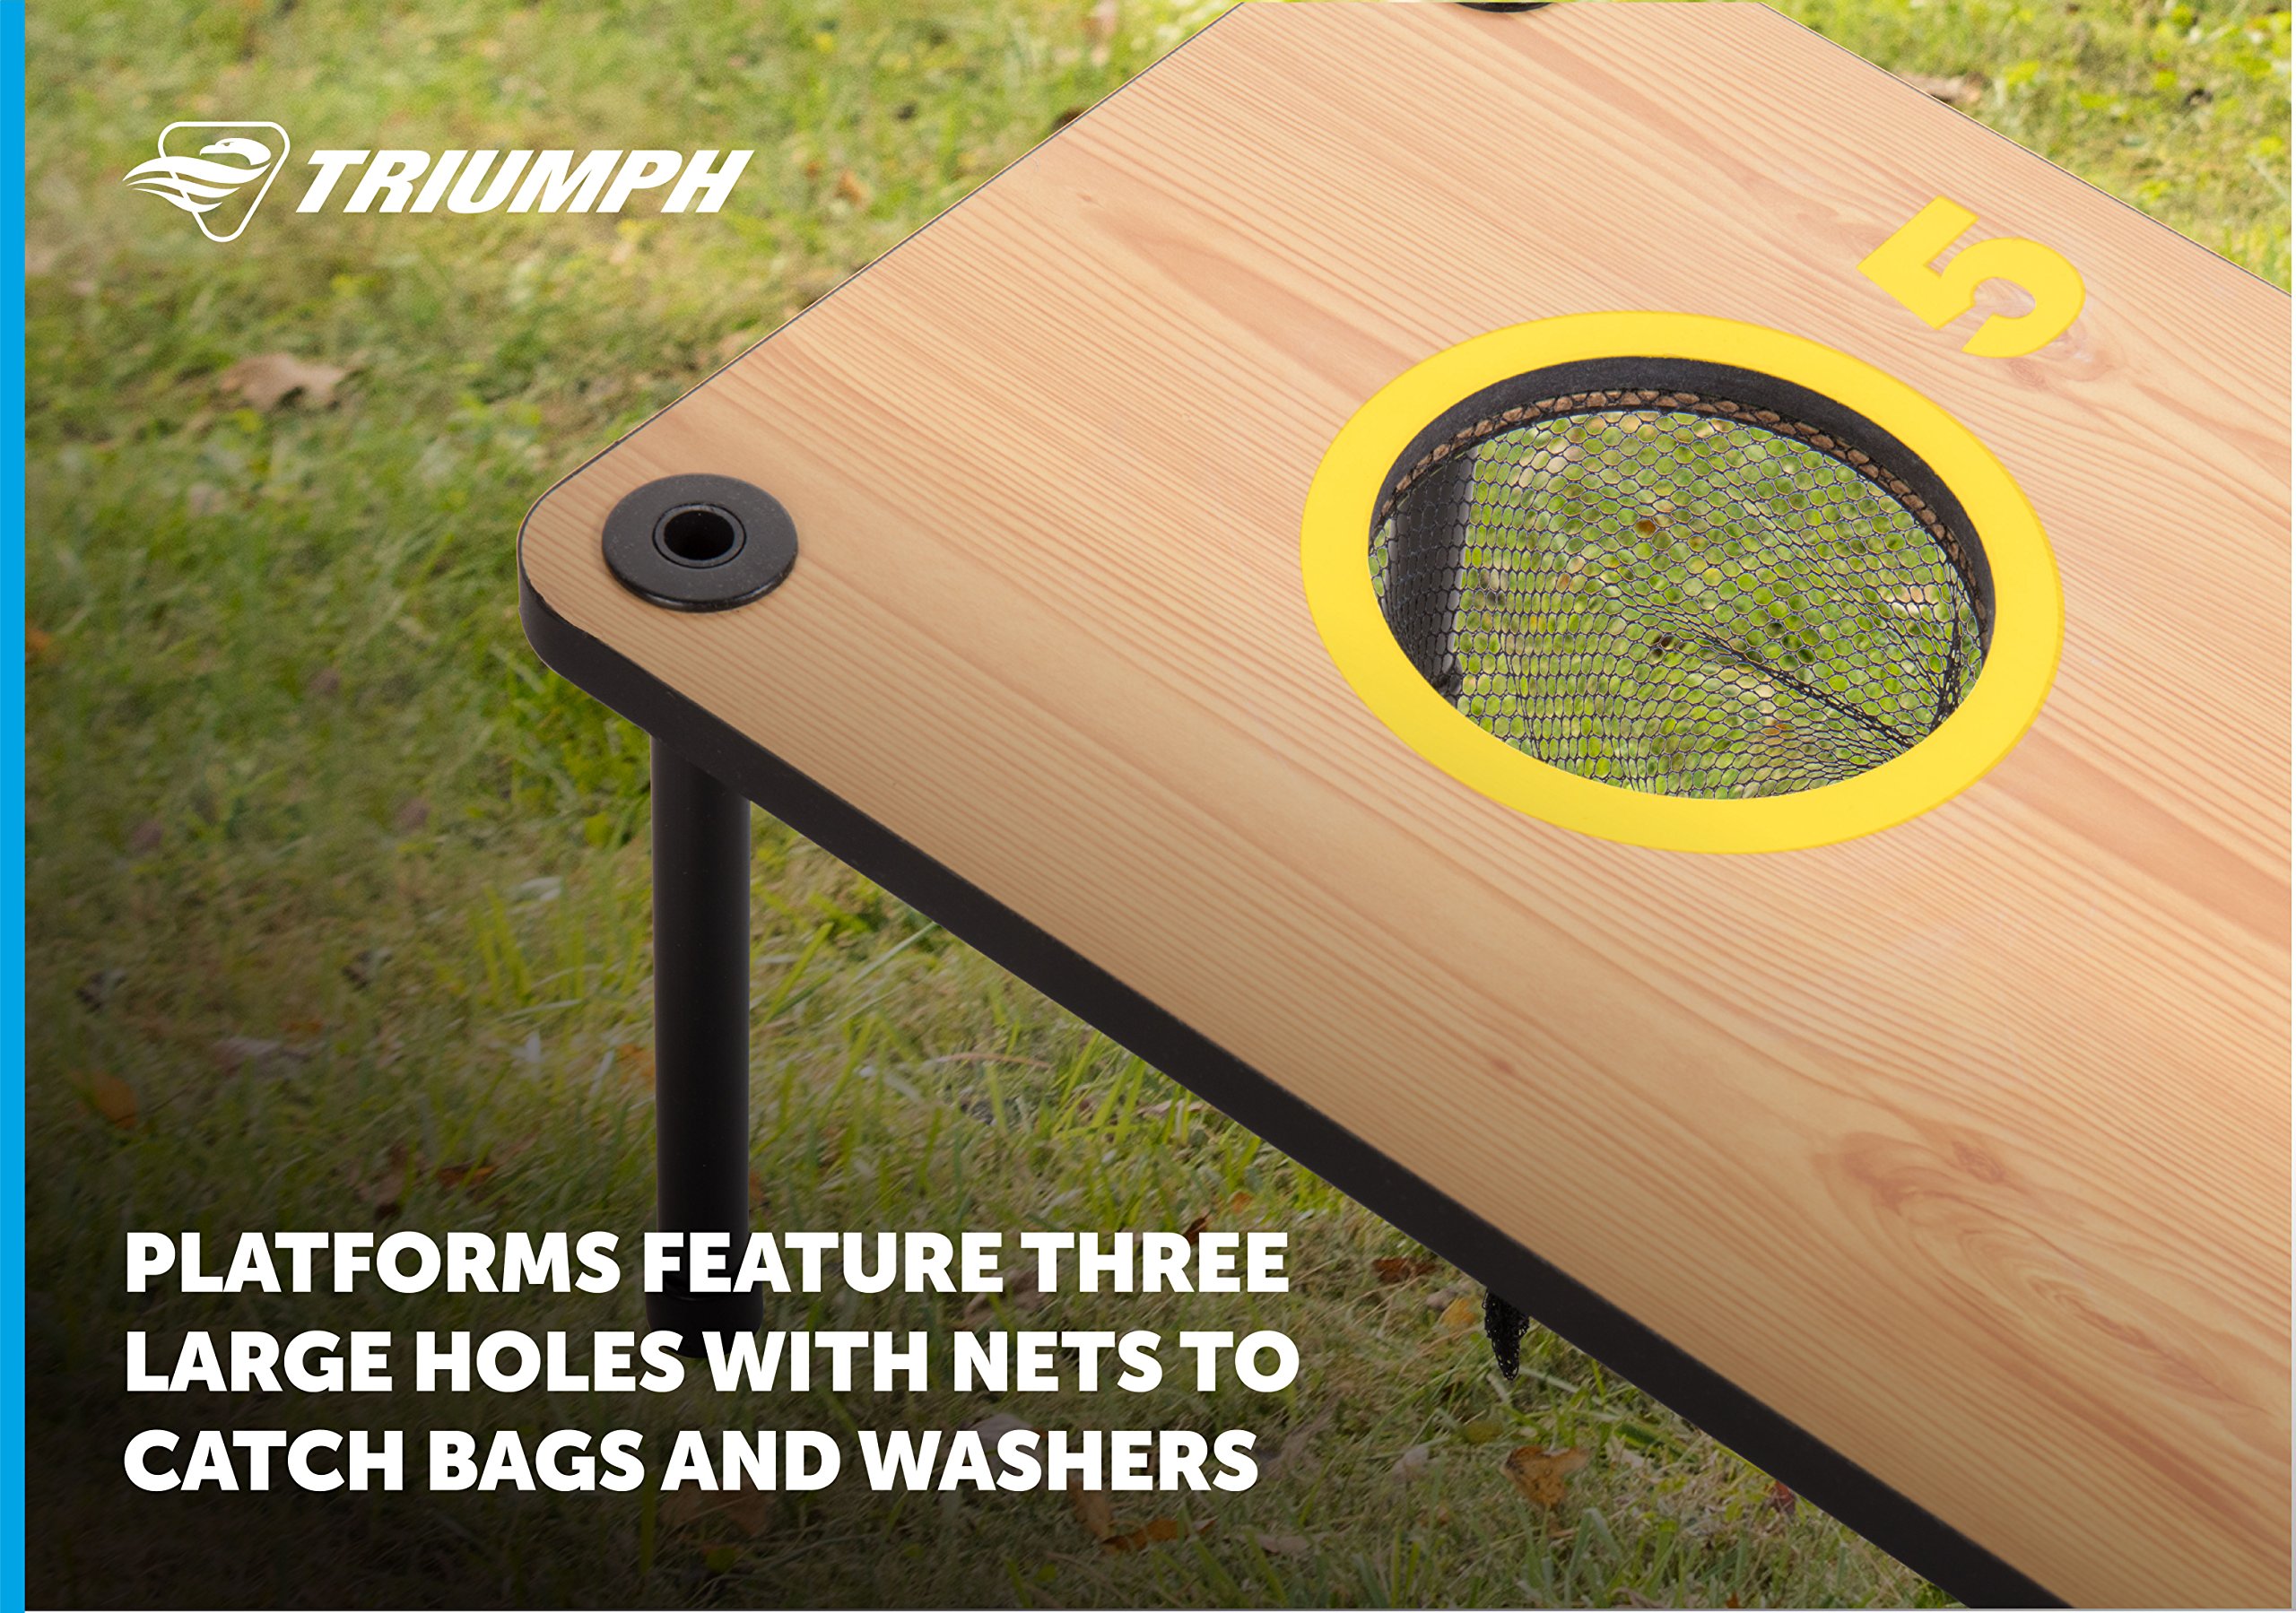 Triumph Sports 2-in-1 Bag Toss/ Washer Toss Combo - Includes 2 Game Platforms, 6 Toss Bags, 6 Washers